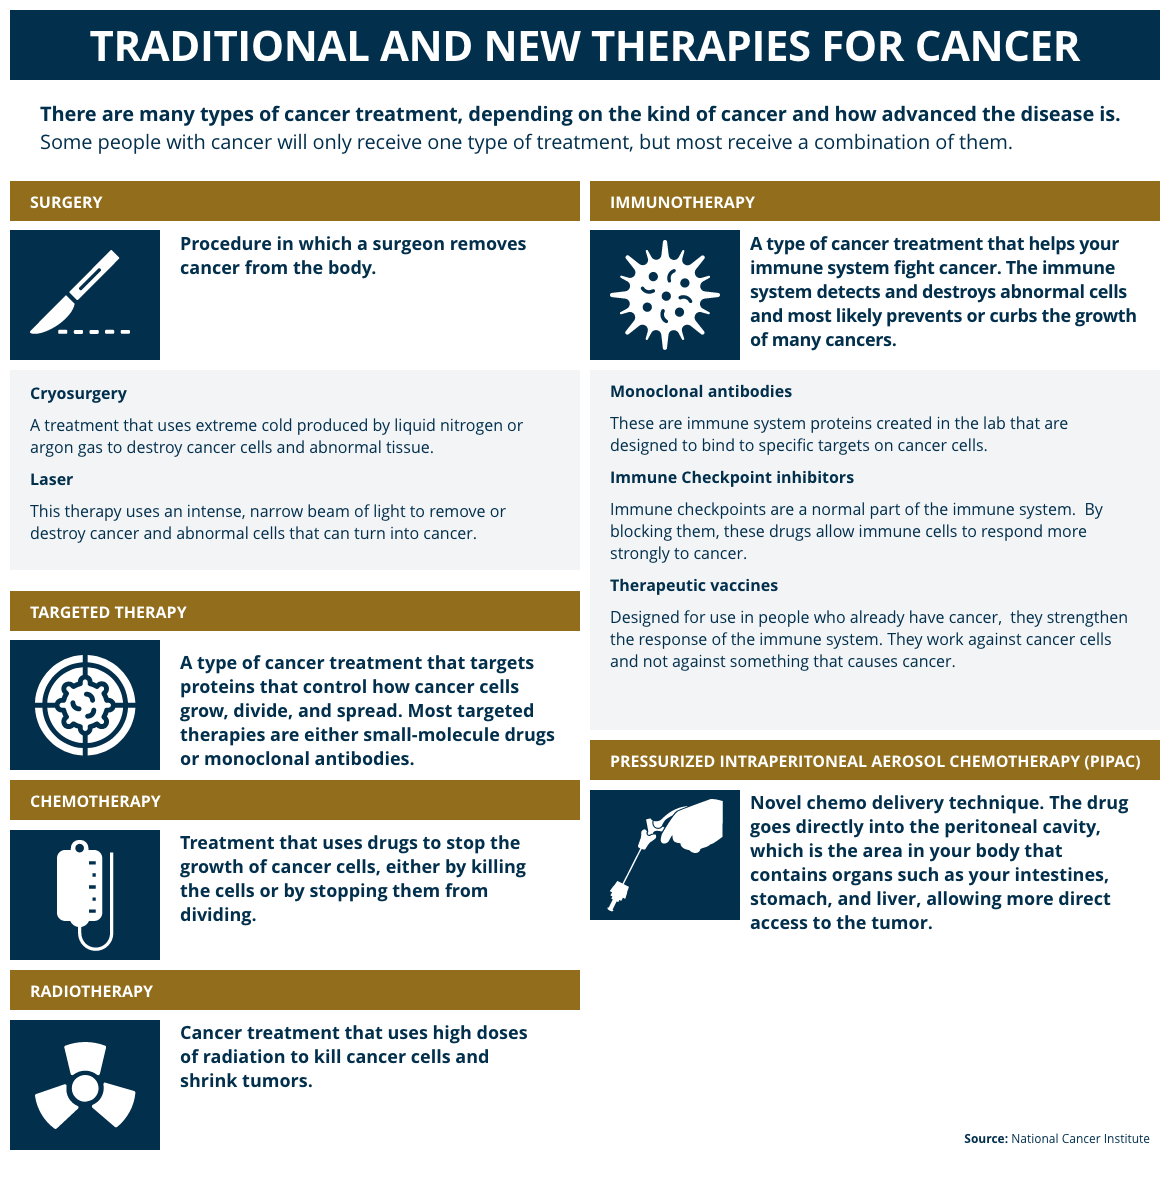 Five new advances in treatments for a cancer diagnosis with a summary of each new treatment